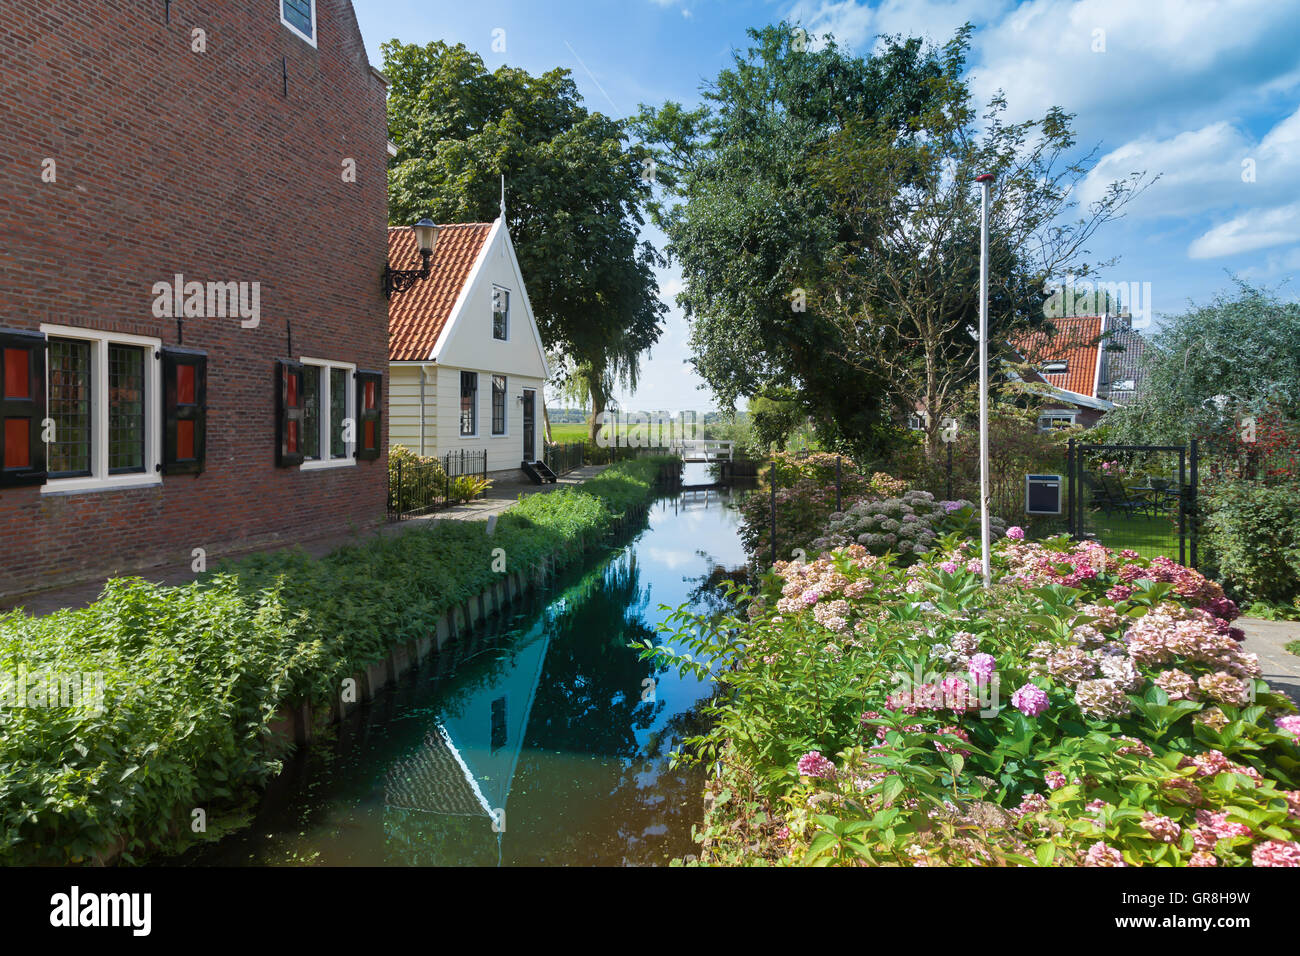 Broek in Waterland, is a village in the Waterland and Zaan Region, in the Dutch province North Holland. Stock Photo